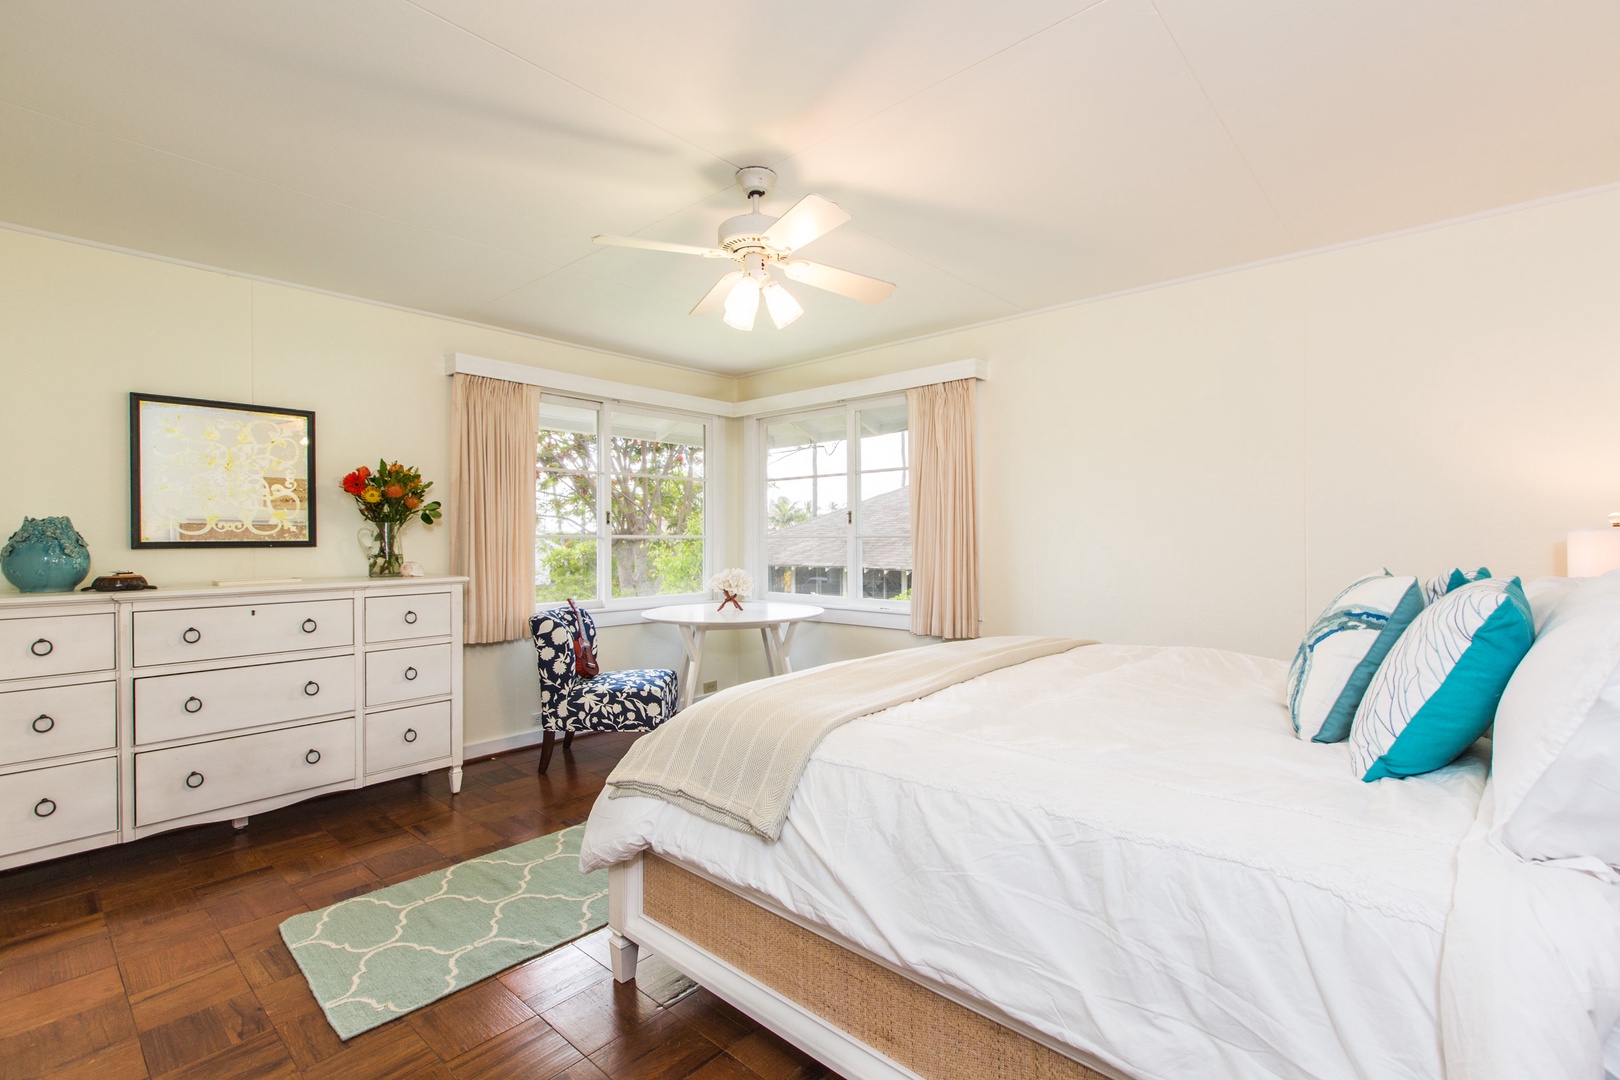 Kailua Vacation Rentals, Lanikai Cottage - Primary with king bed and new split air conditioning system.